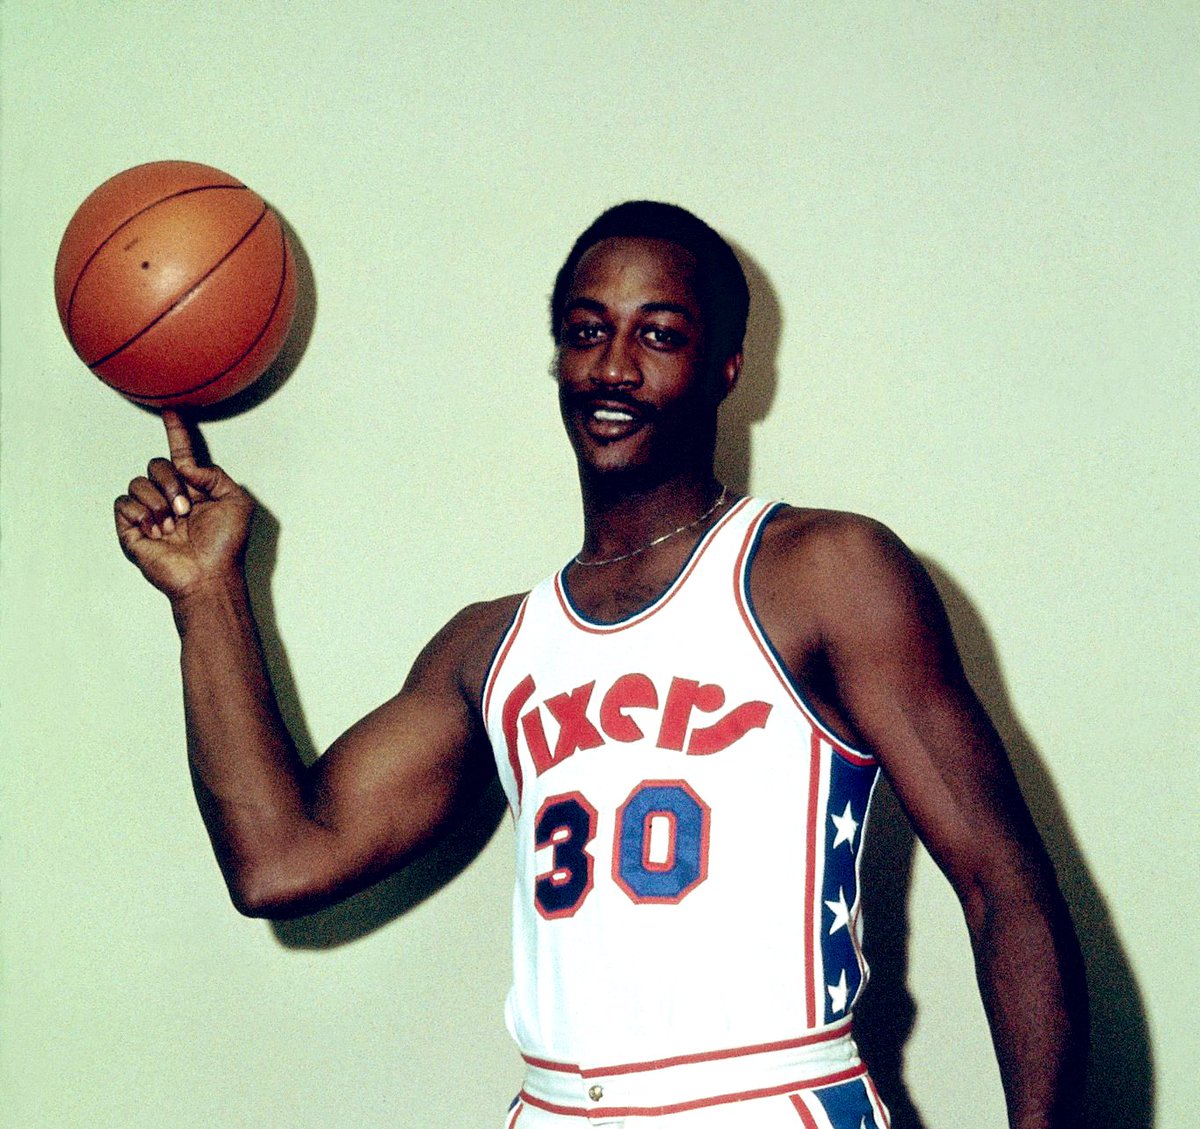 One of the more underrated jerseys in #76ers history. Worn by George McGinnis circa 1974. #brotherlylove
#sixers #philadelphia #hardwoodclassics